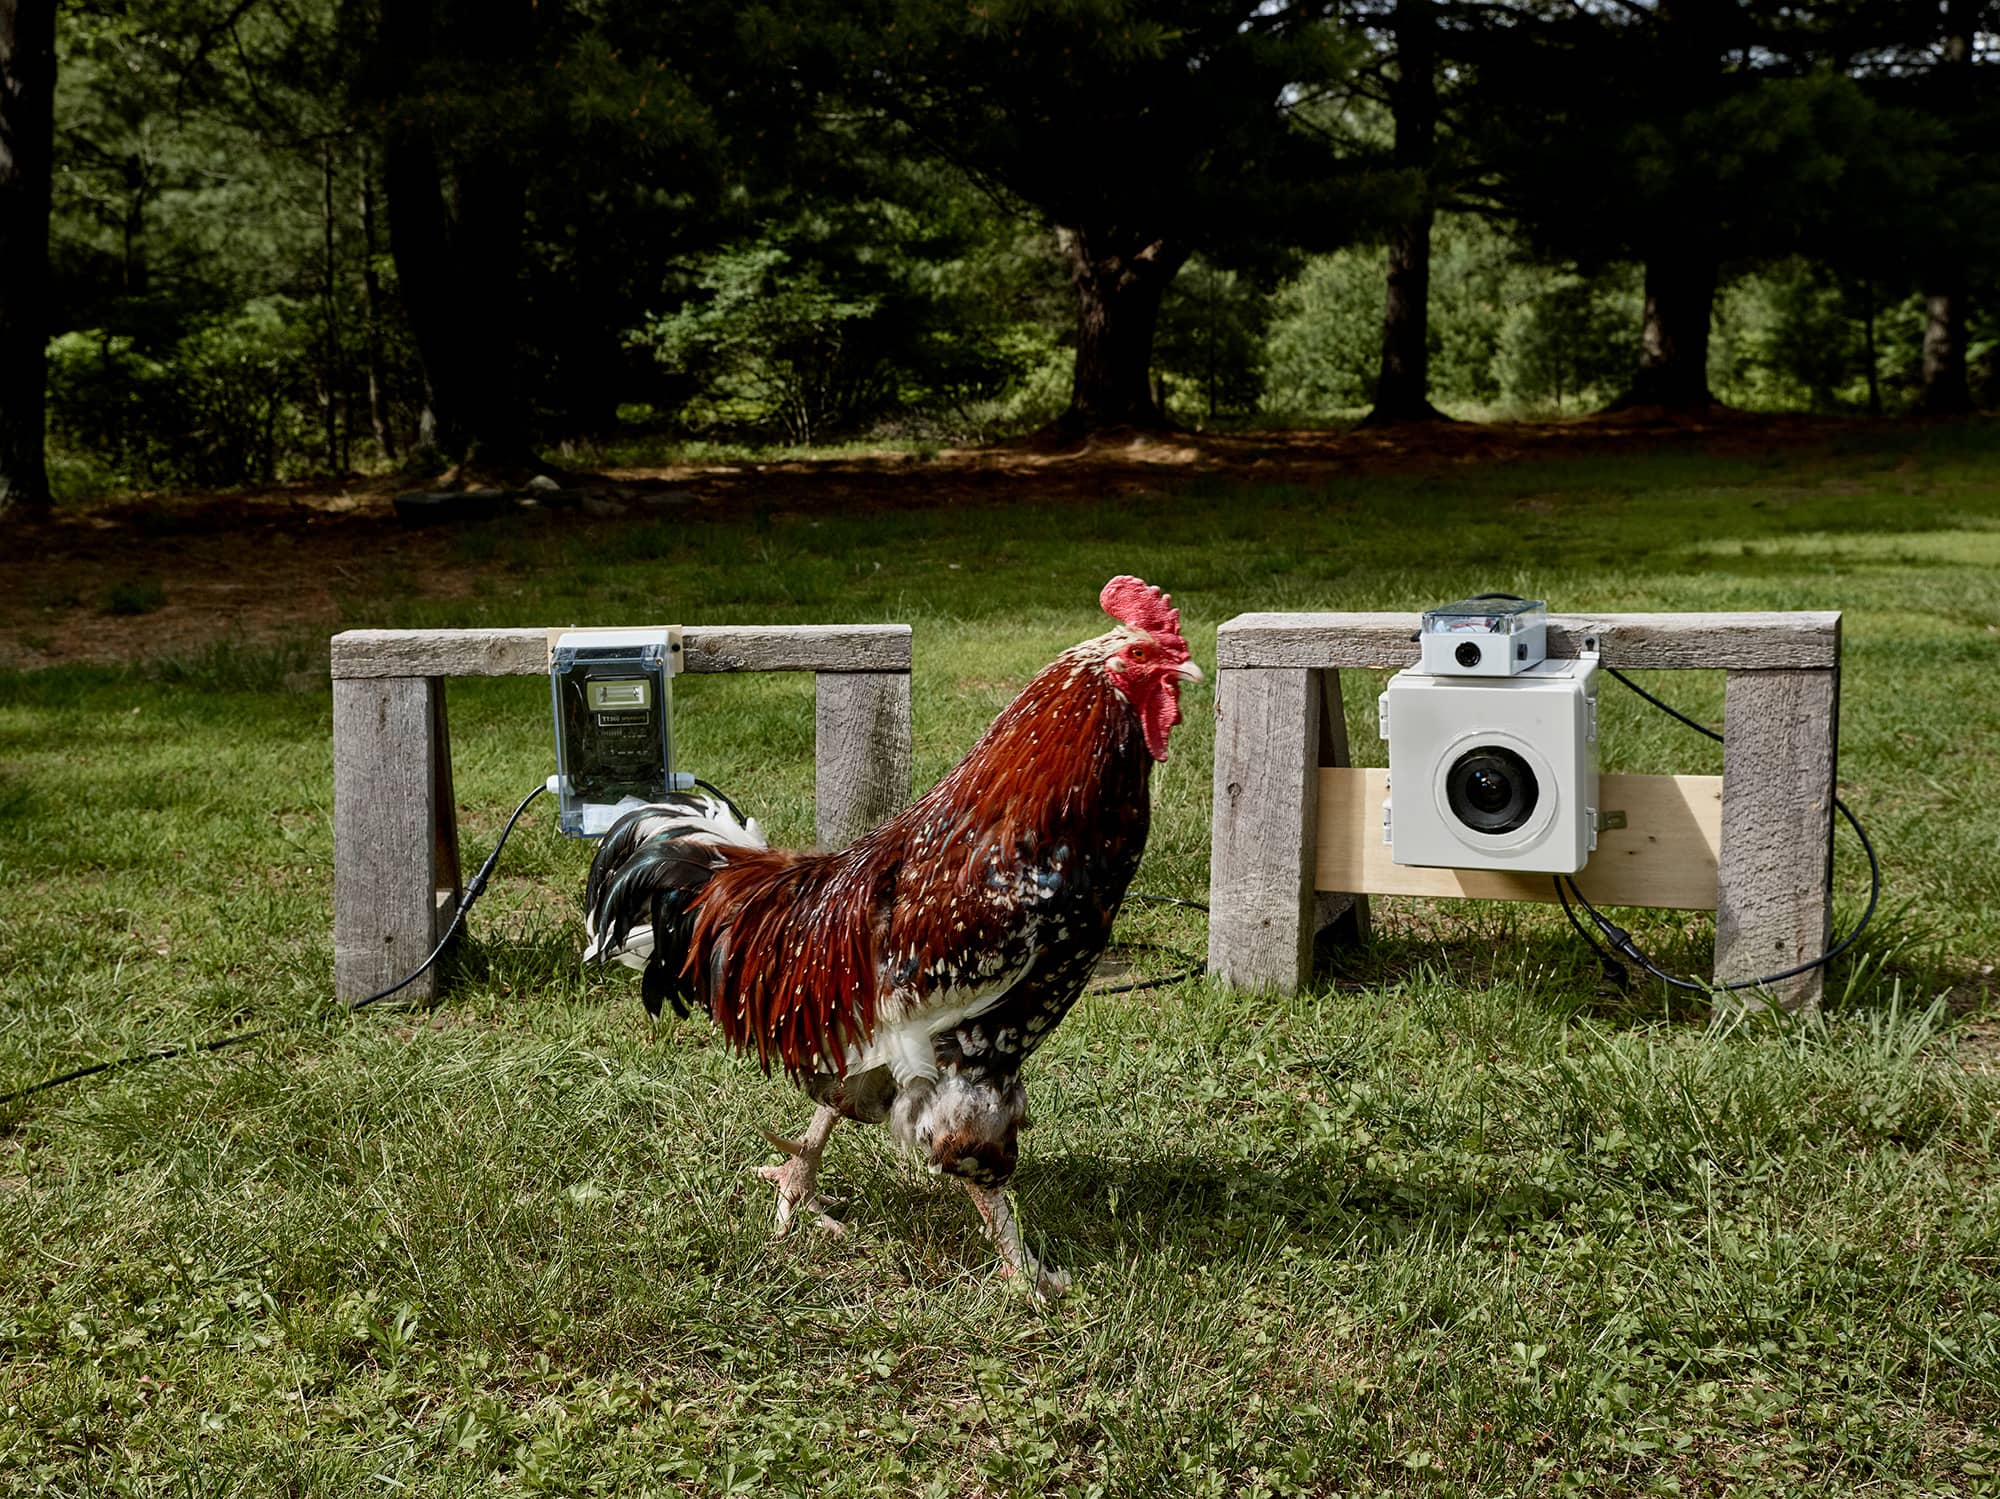 Marcel the Rooster posing with the chicken.photos setup